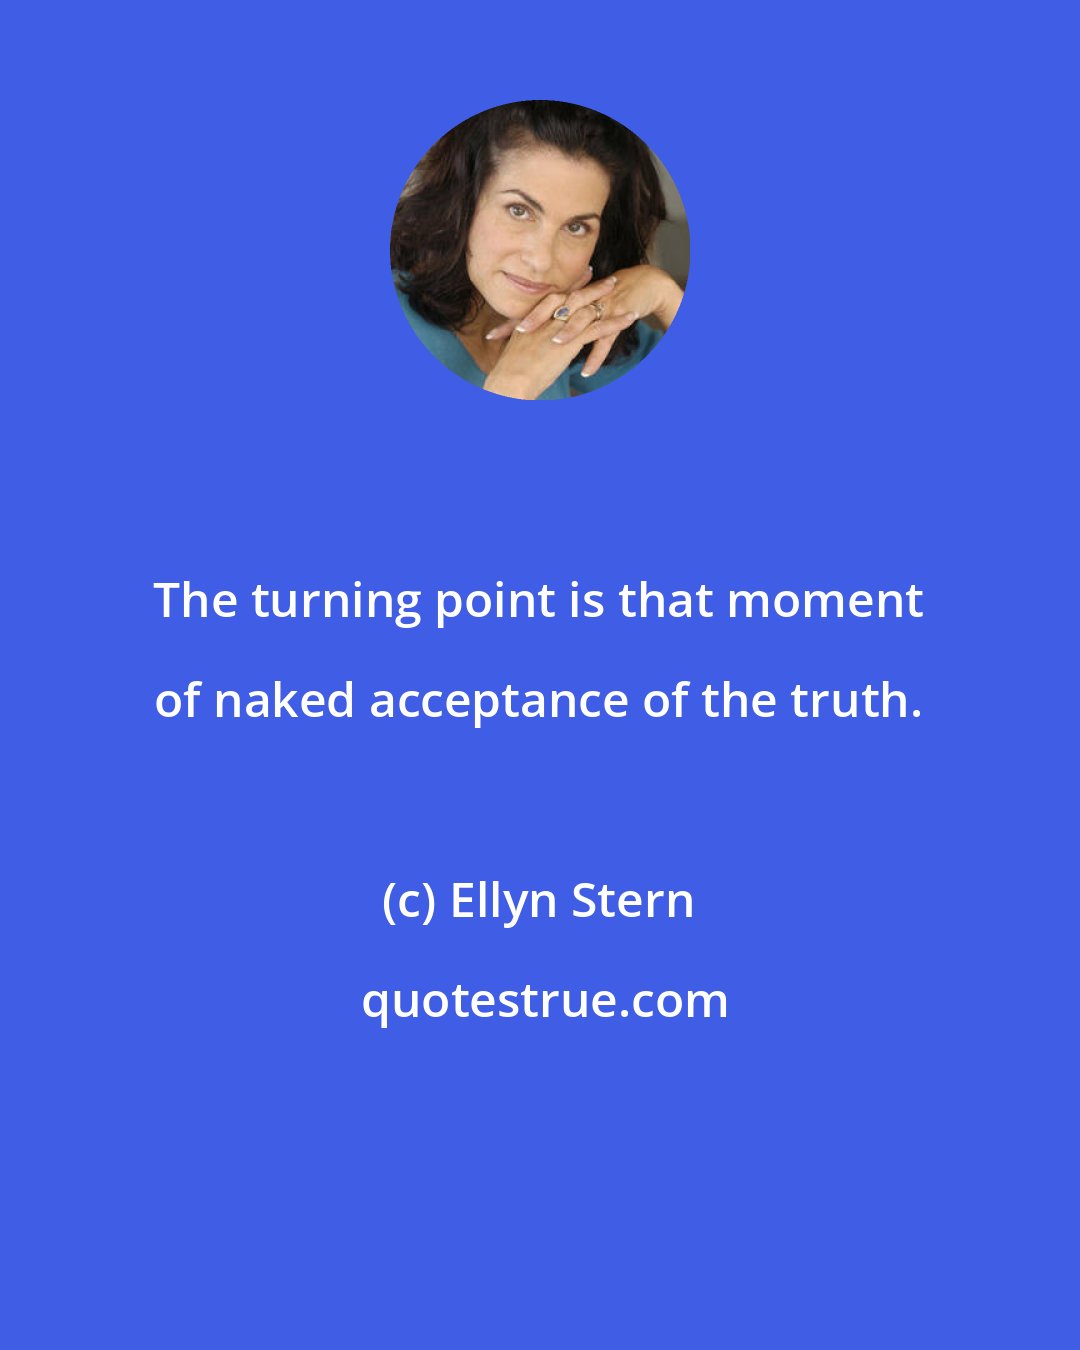 Ellyn Stern: The turning point is that moment of naked acceptance of the truth.